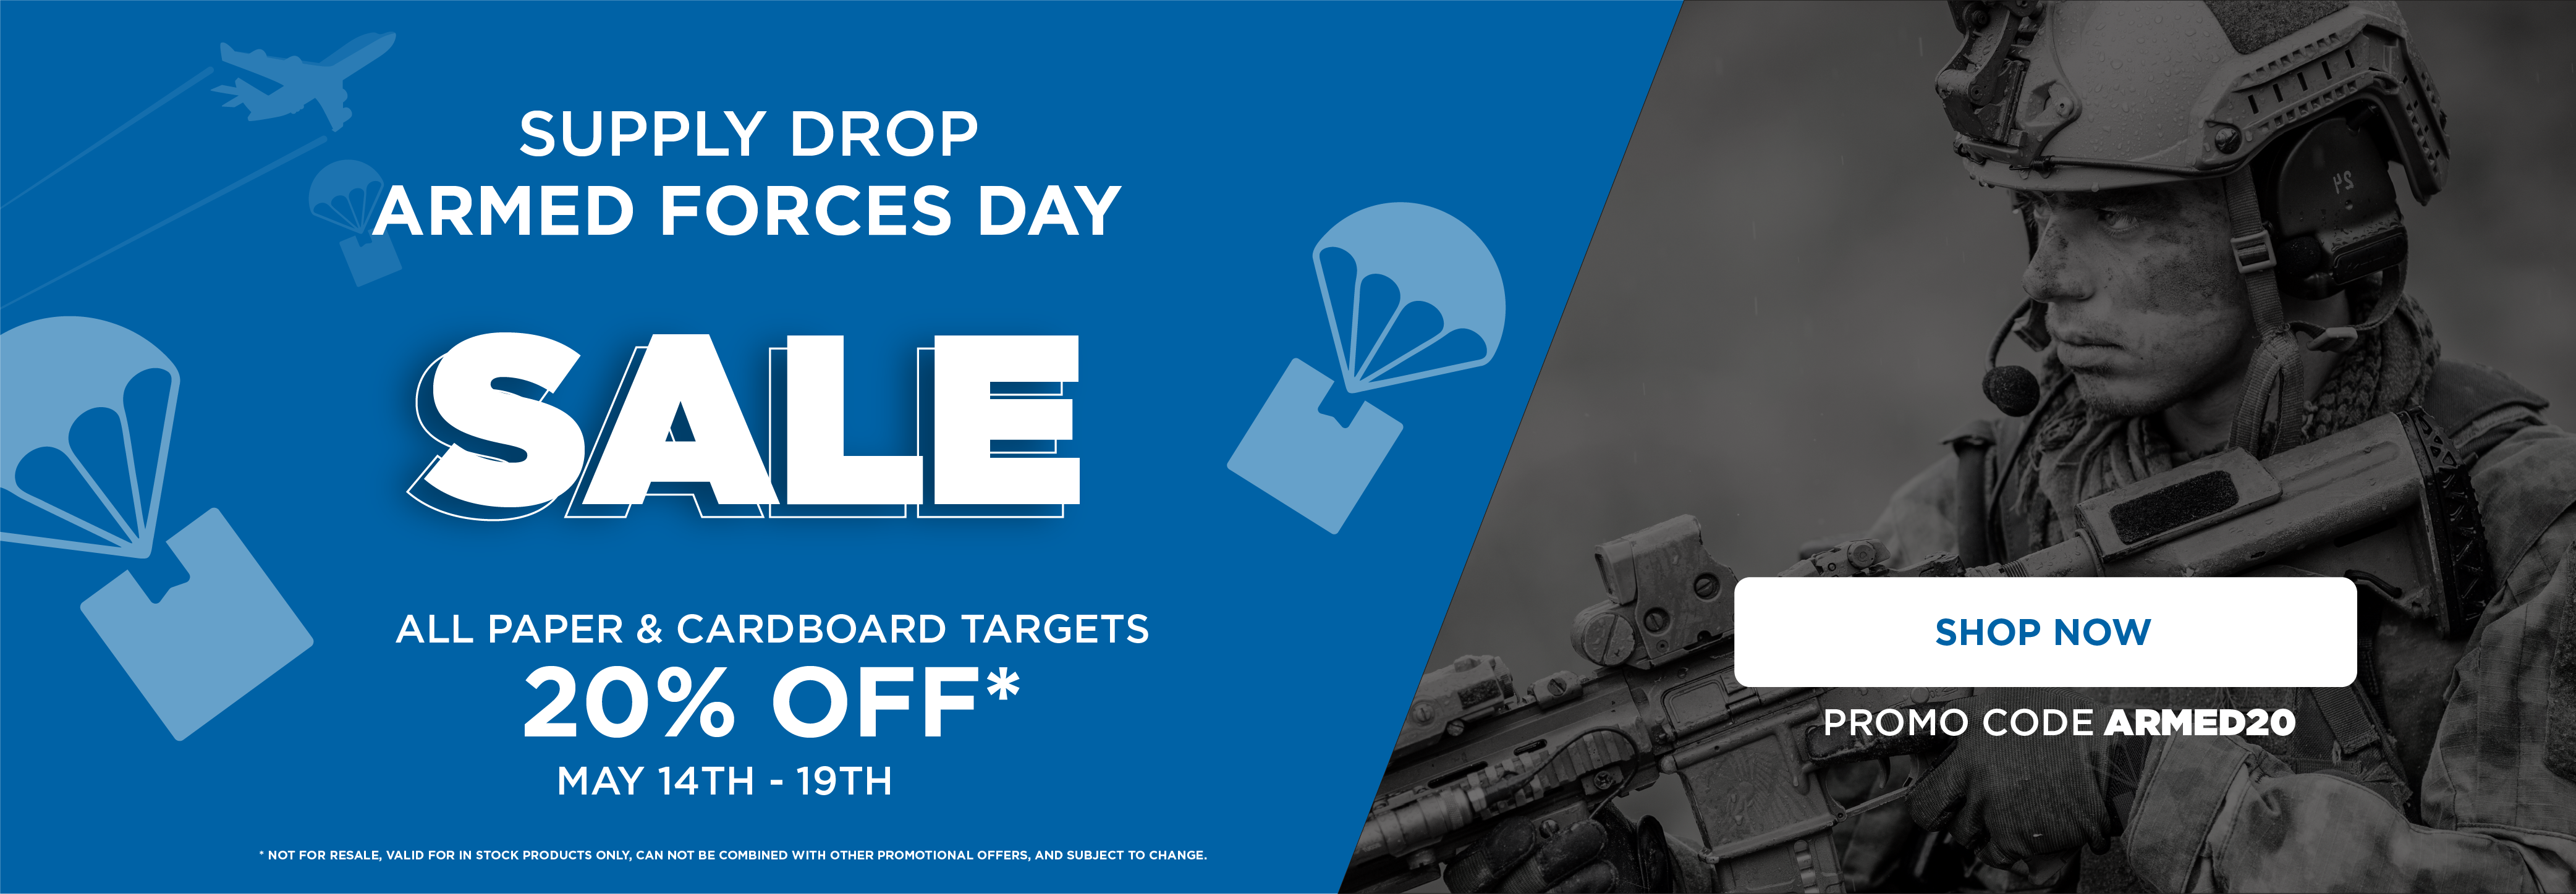 20% off in-stock paper and cardboard targets